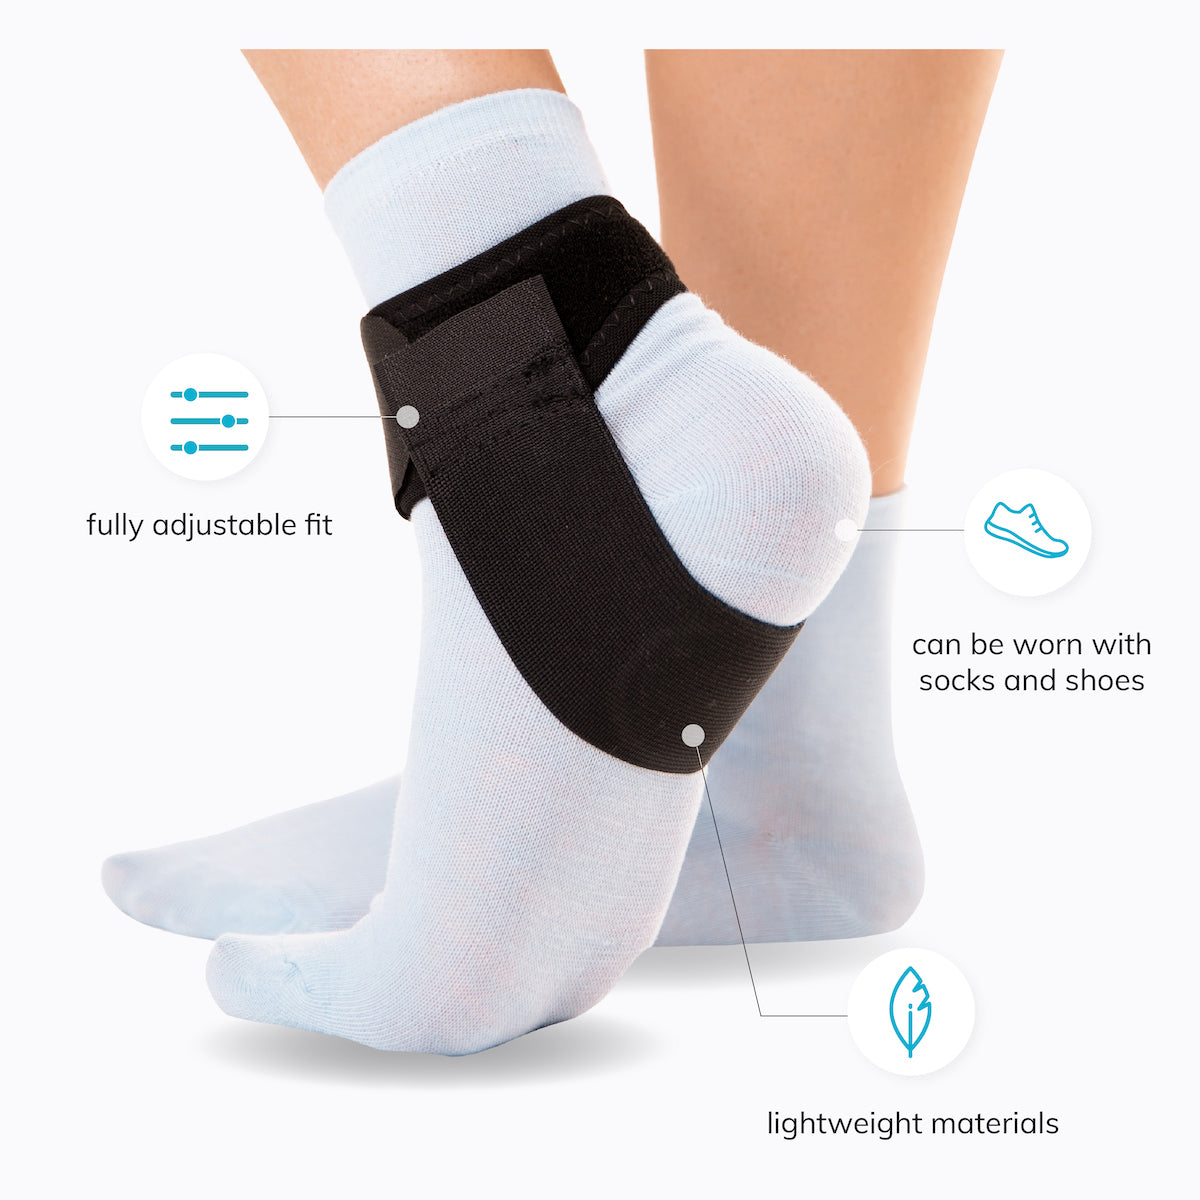 the achilles tendonitis treatment brace can be worn with socks or shoes for daytime support